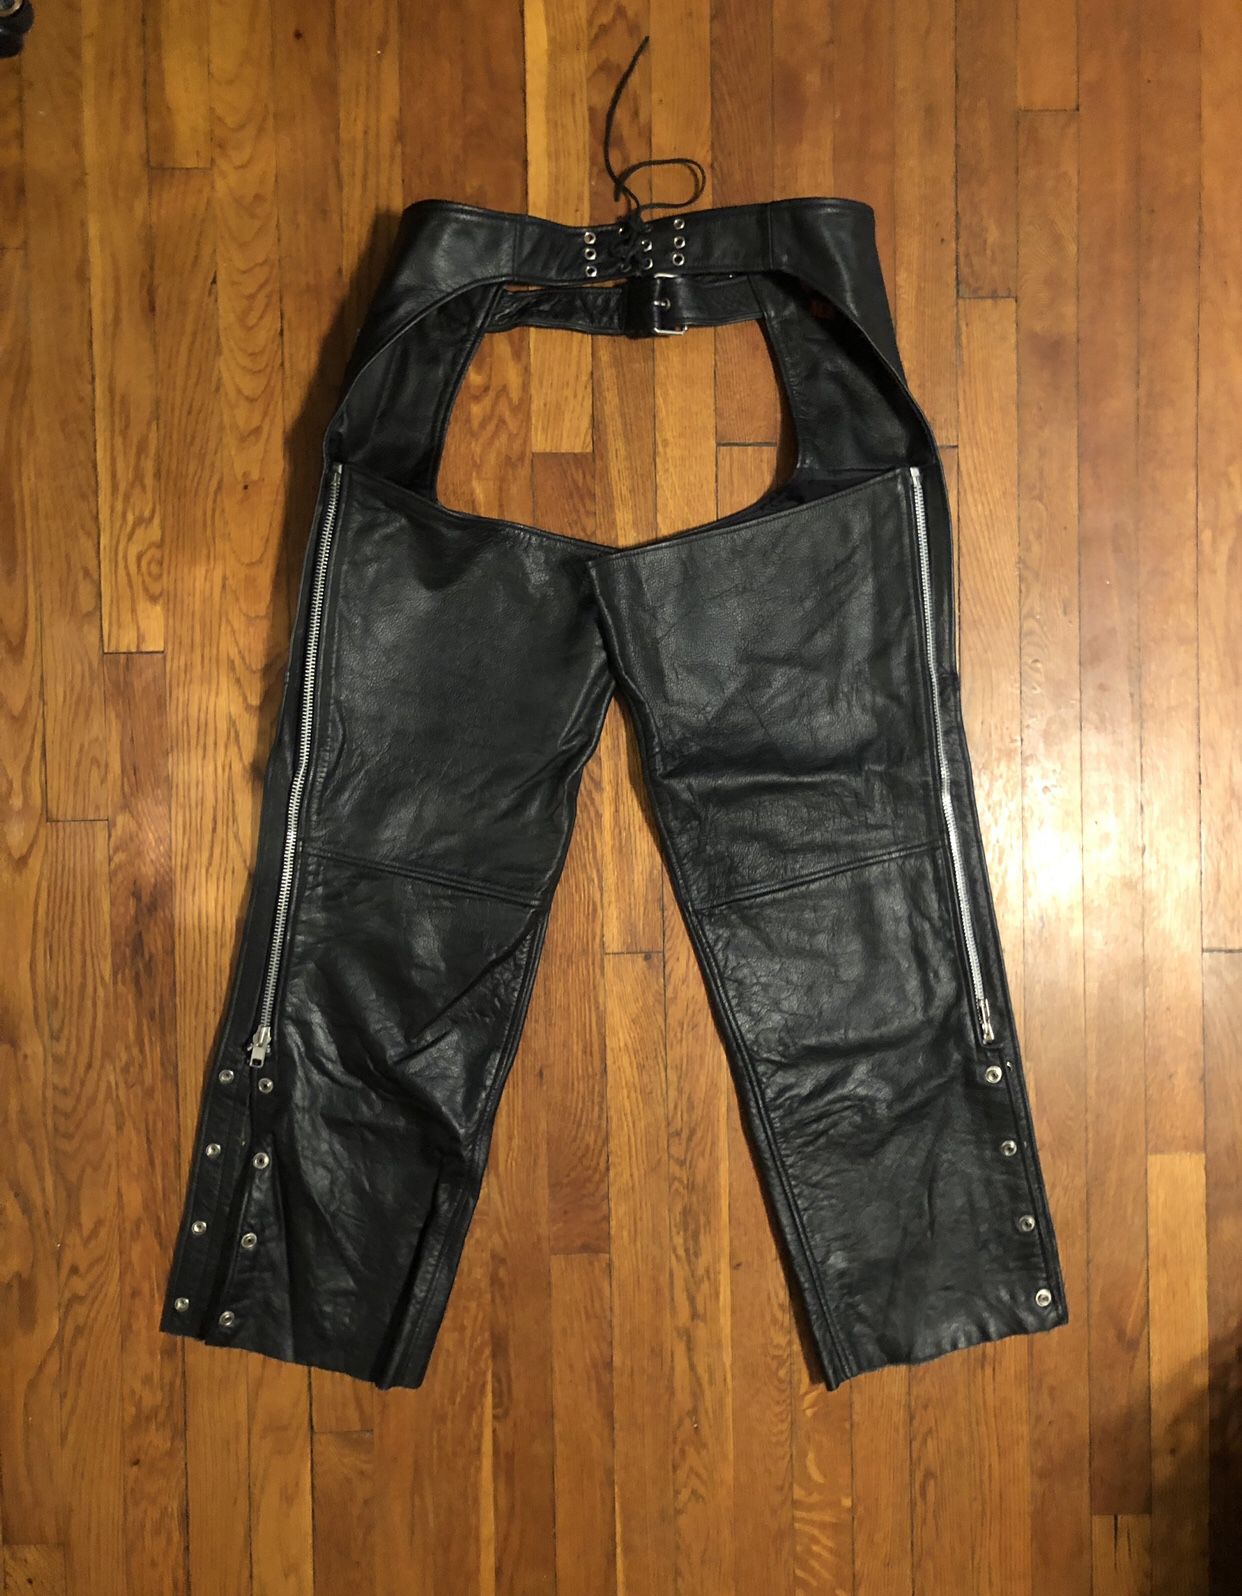 Vintage motorcycle pants XXL real leather paid $260. Excellent condition! Midtown Cycles New York City